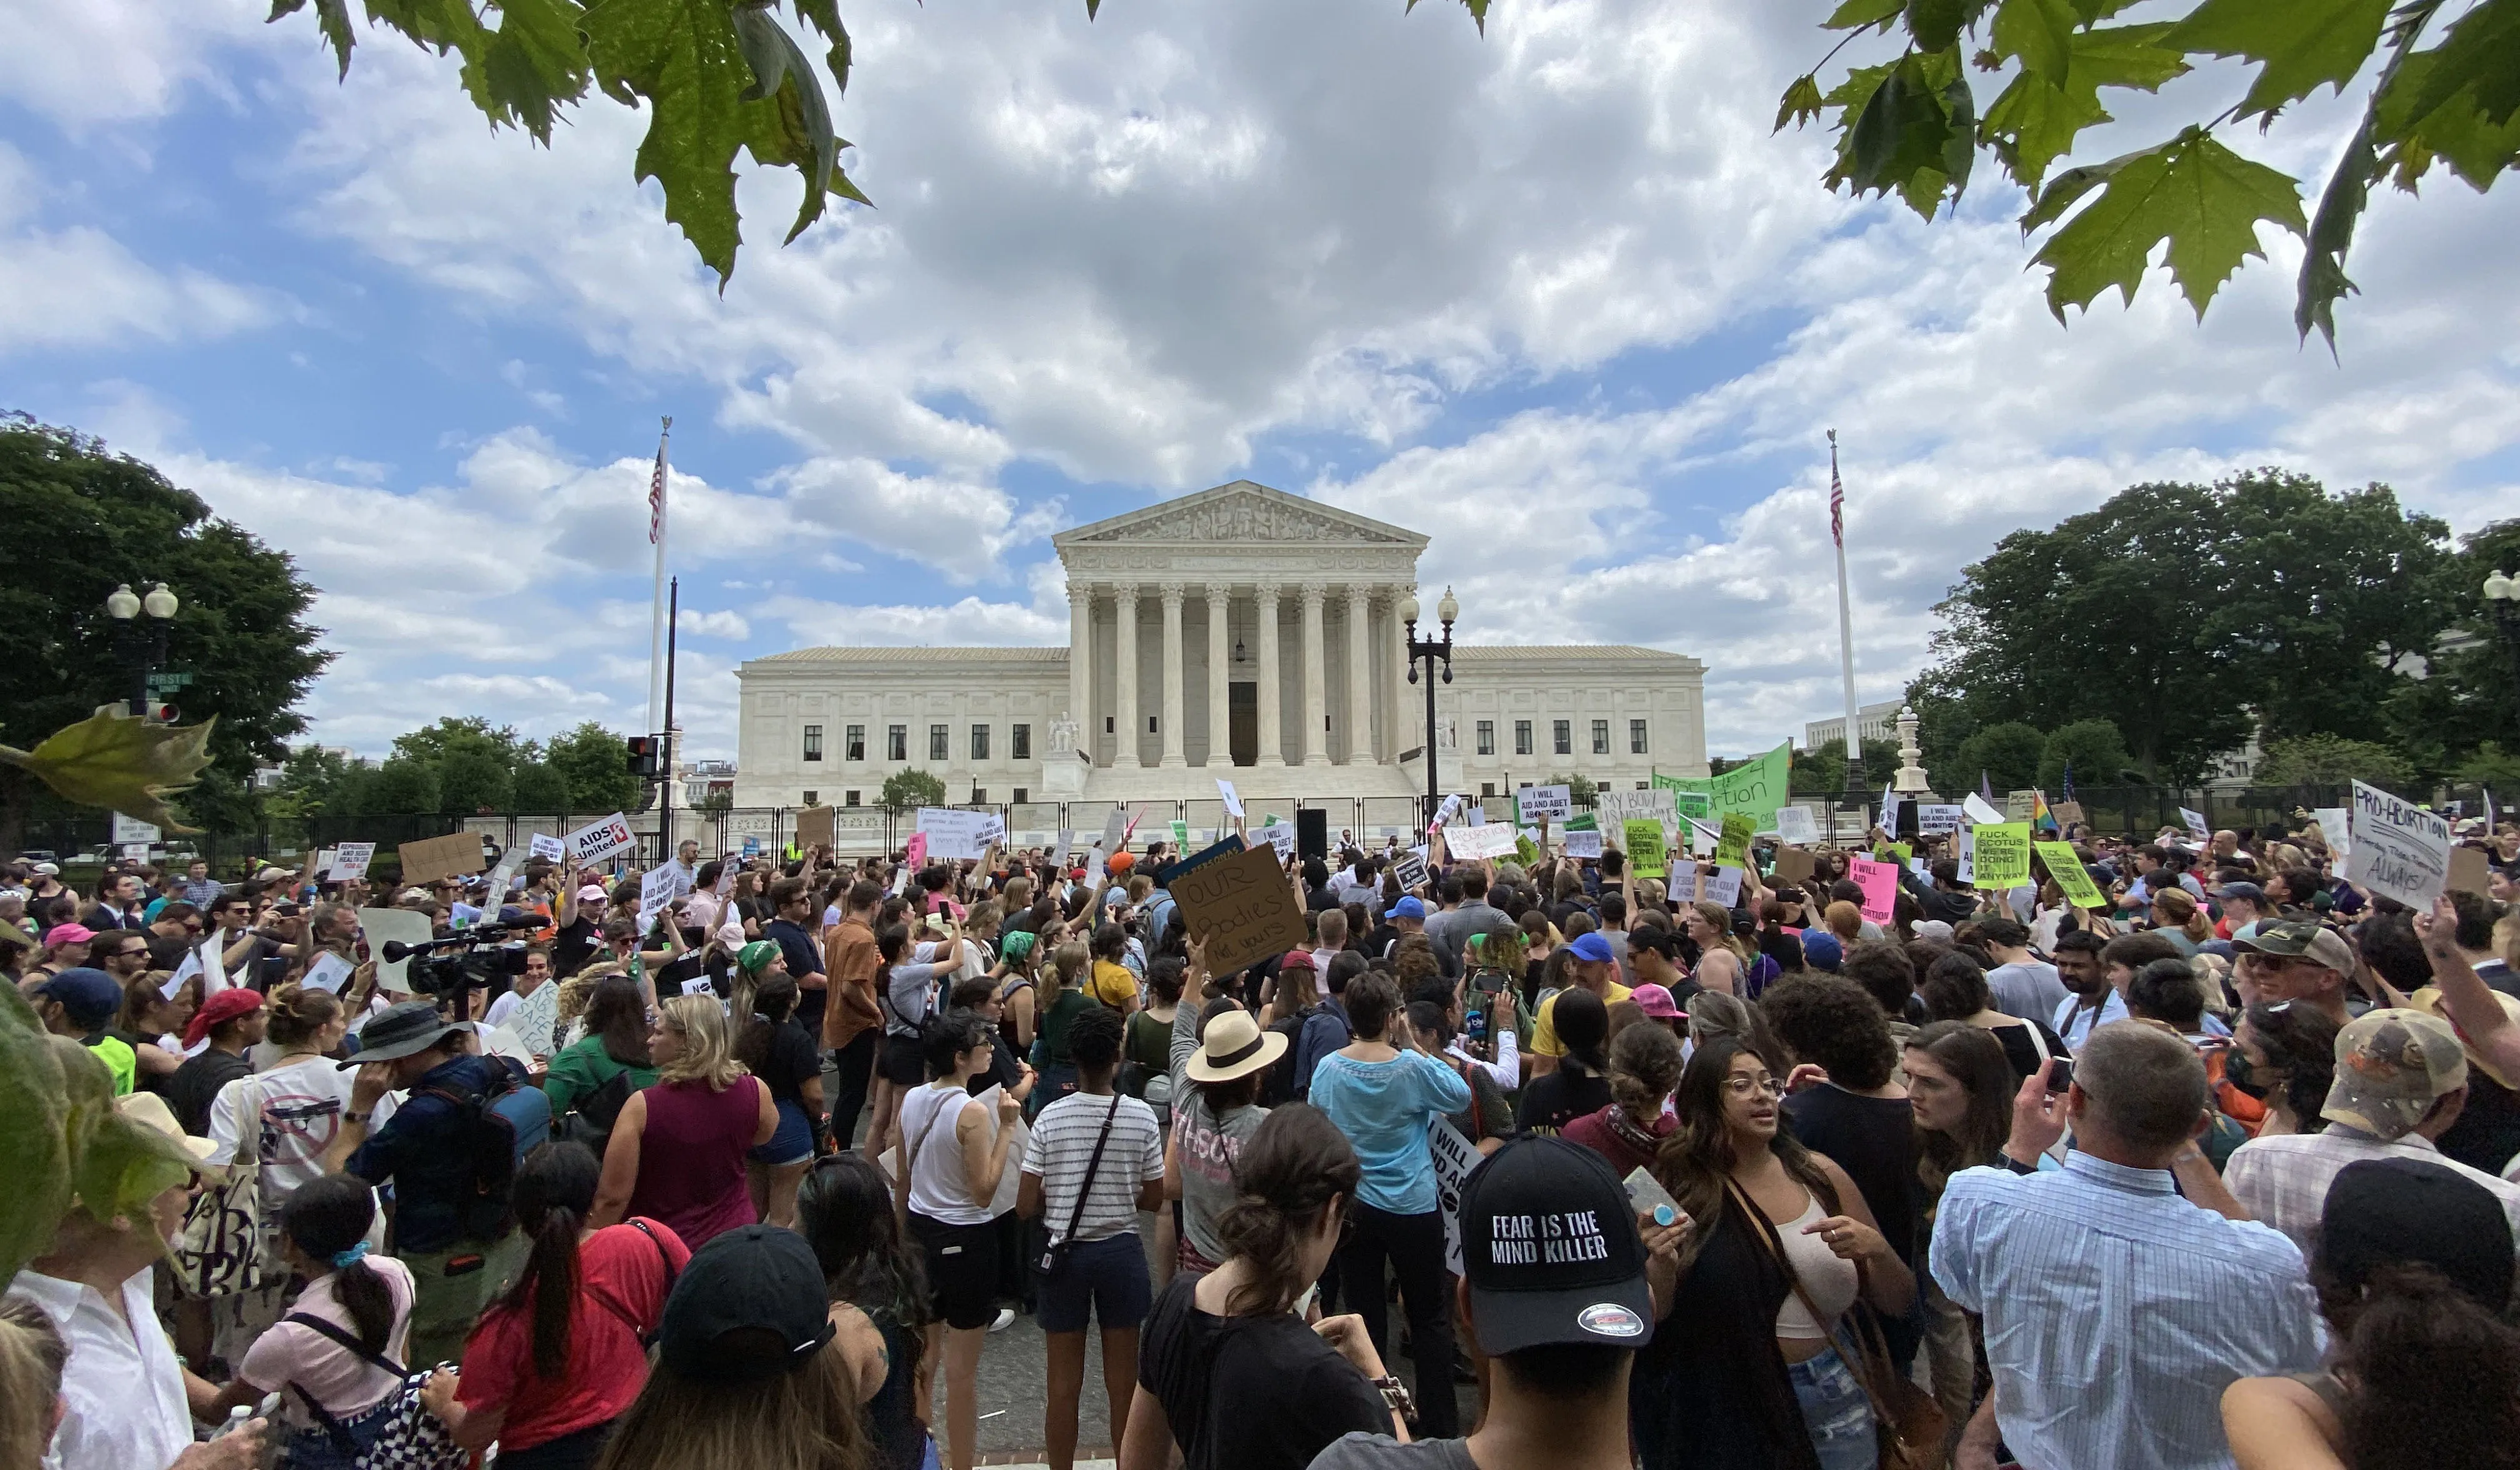 Demonstrators on both sides of the abortion debate outside the U.S. Supreme Court in Washington, D.C., after the court released its decision in Dobbs, June 24, 2022.?w=200&h=150